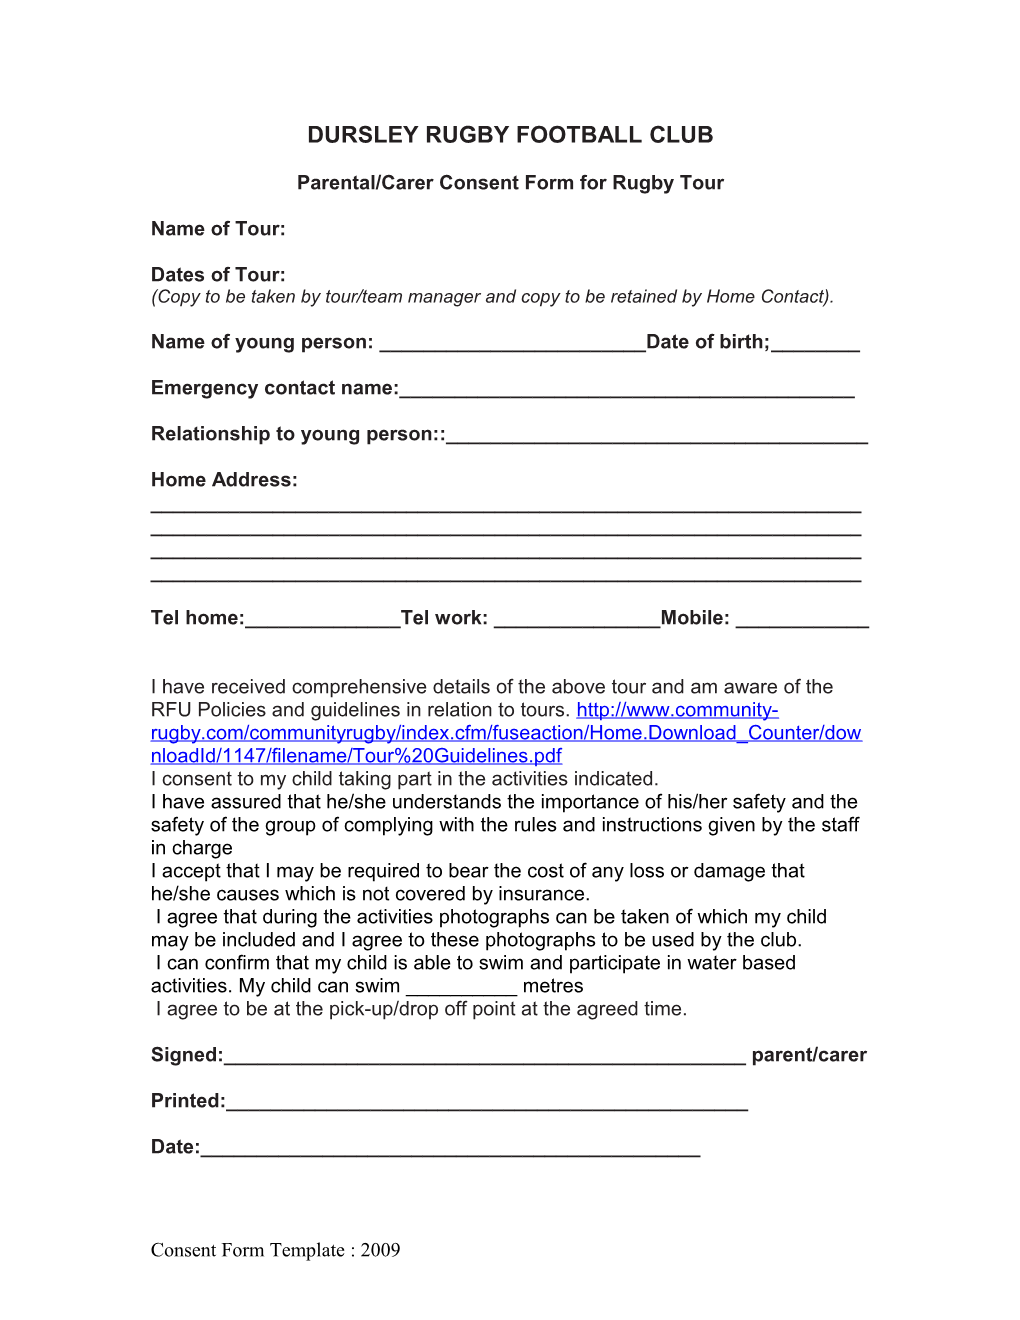 Parental/Carer Consent Form for Rugby Tour